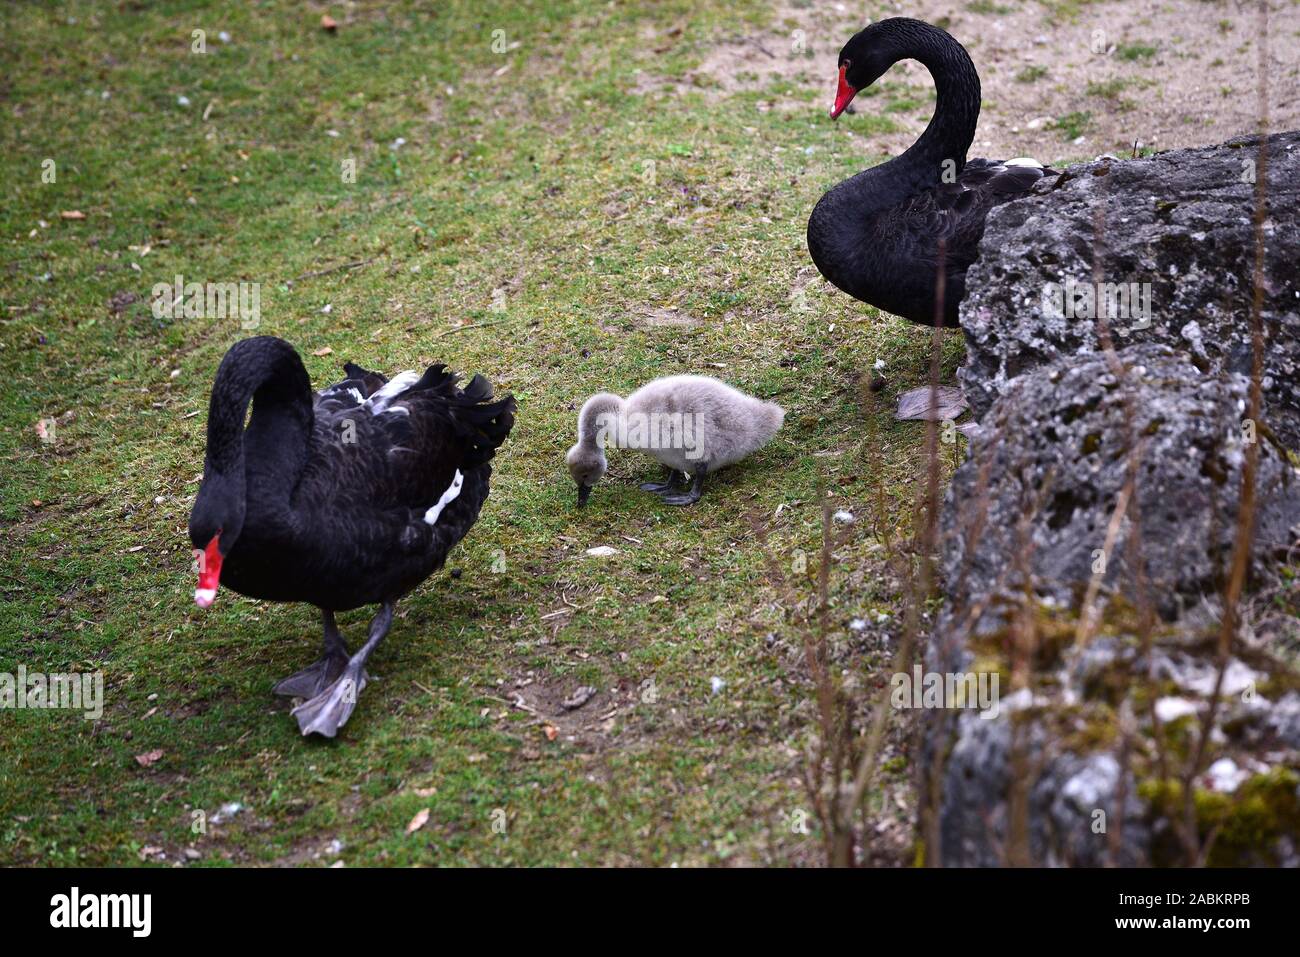 fjerkræ kultur problem Mourning Swan High Resolution Stock Photography and Images - Alamy